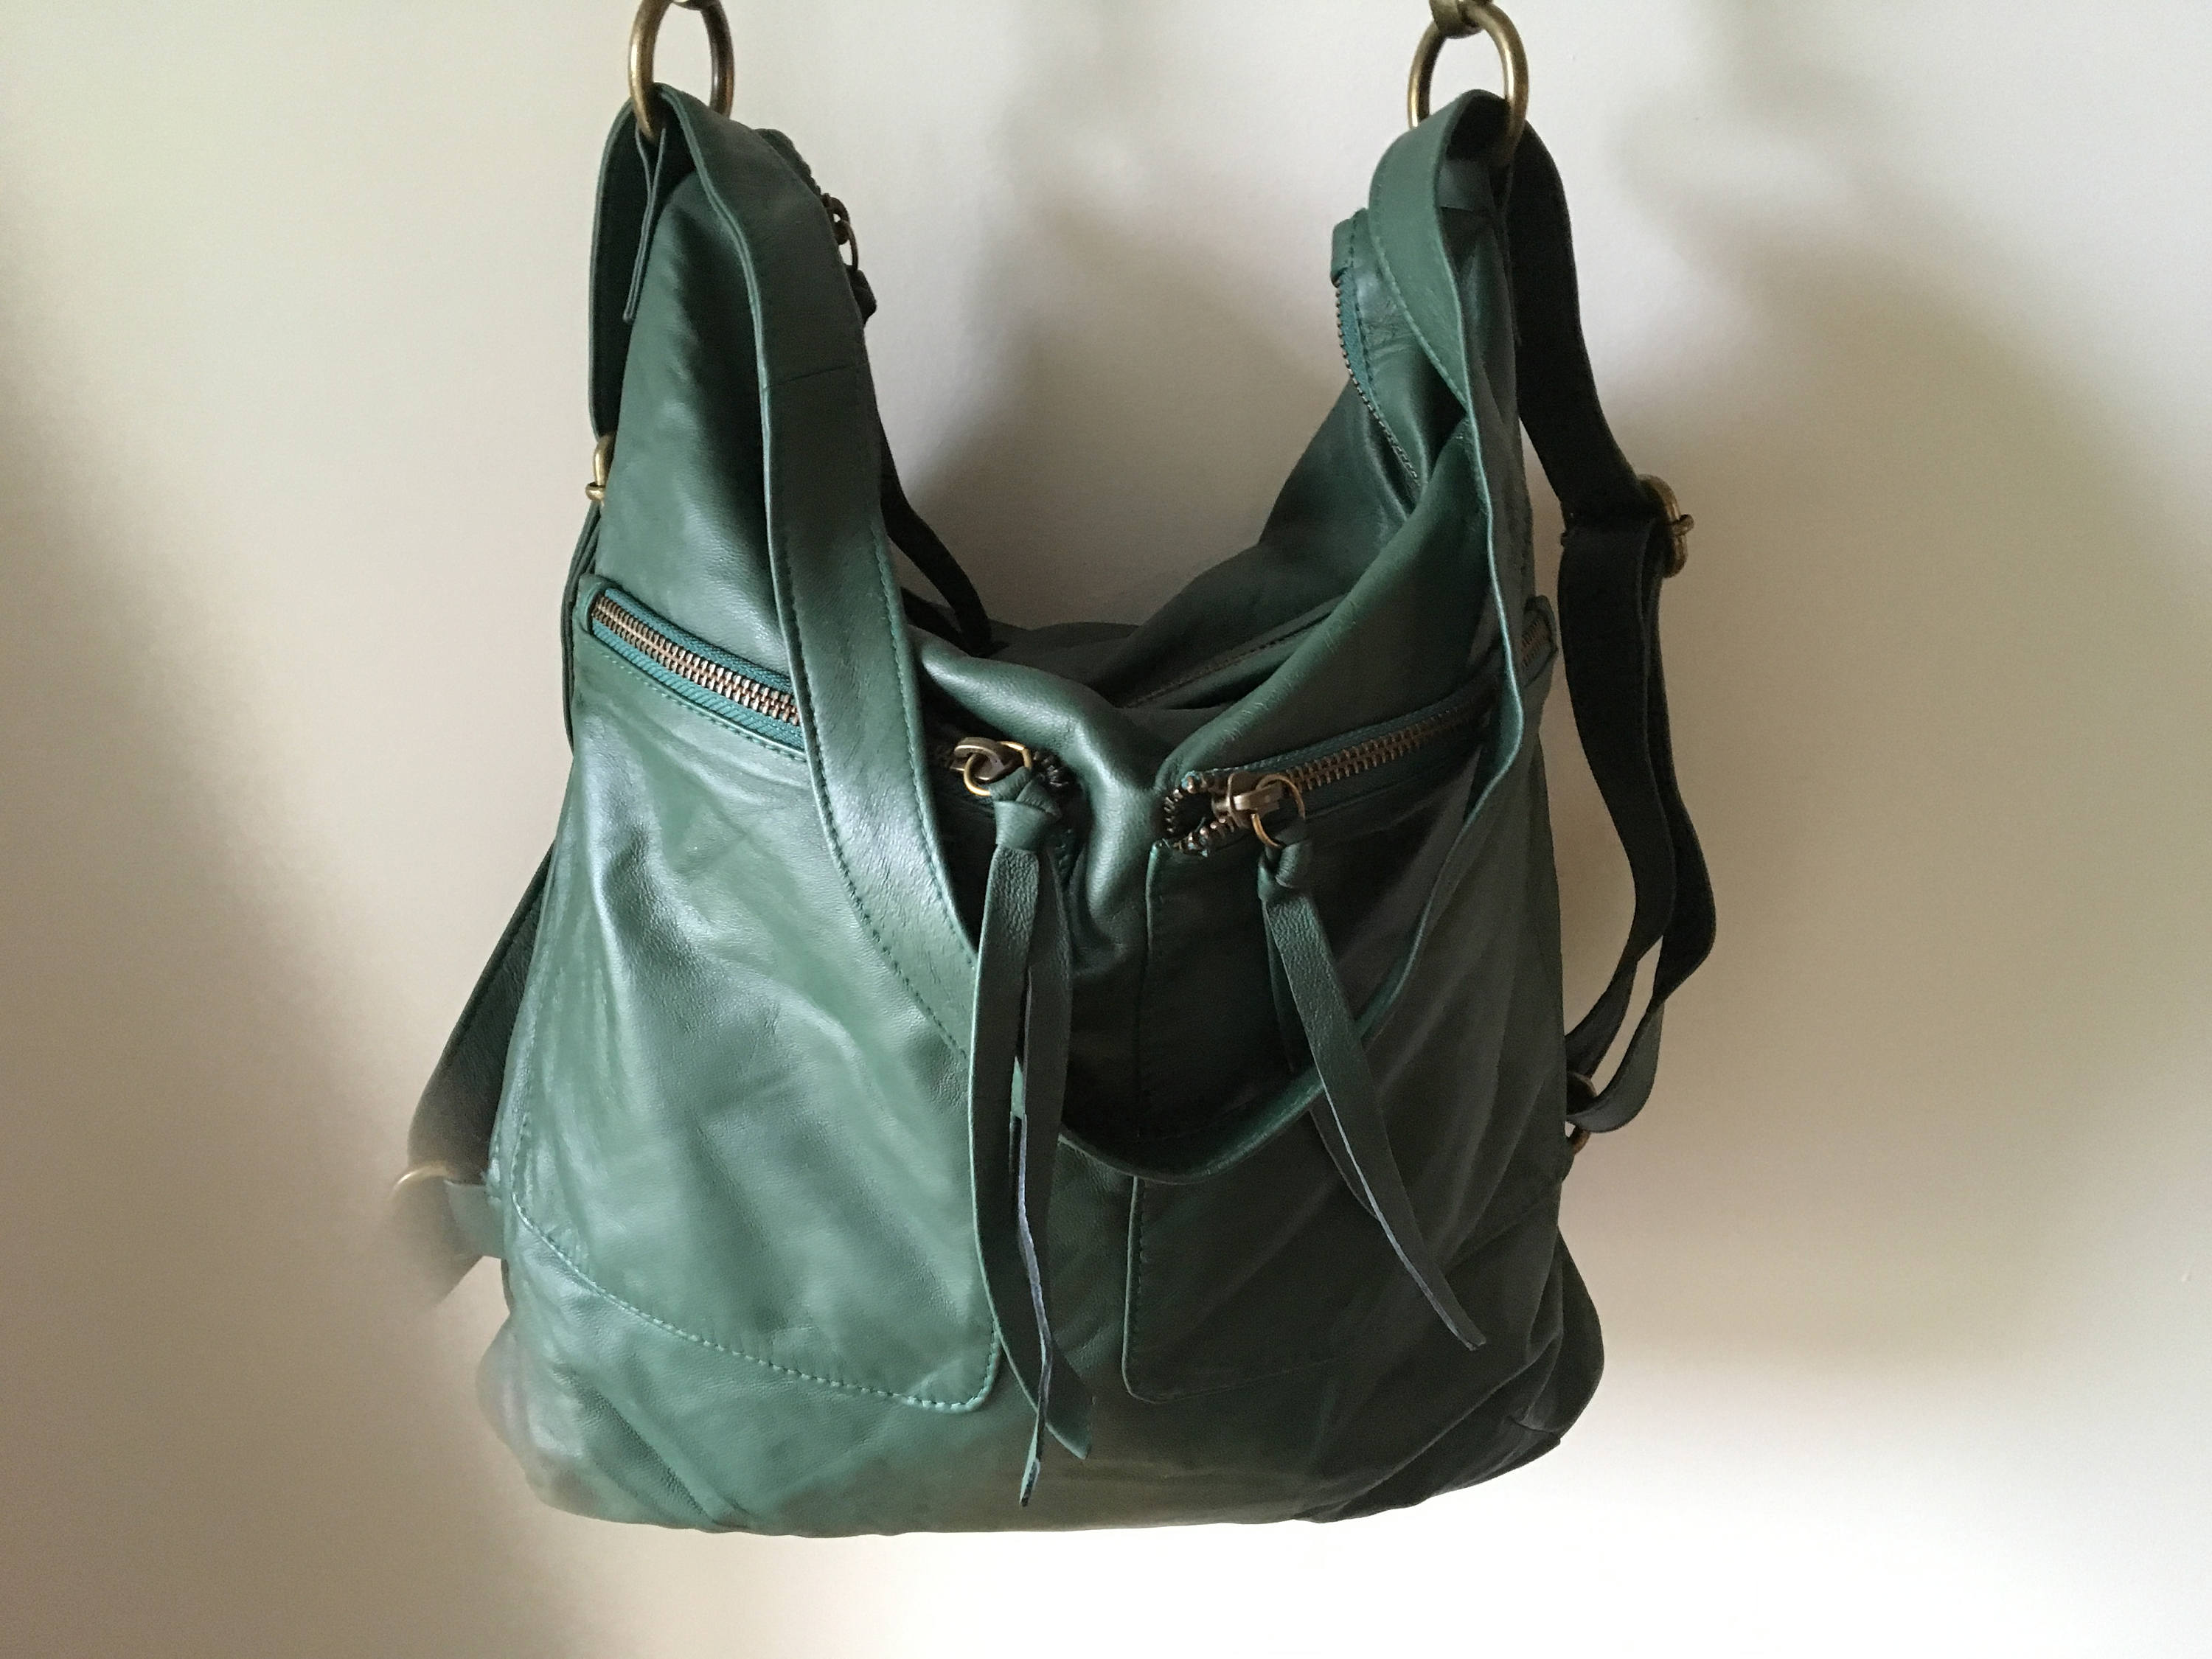 Backpack convertible leather bag.Real leather rucksack or crossbody bag ...